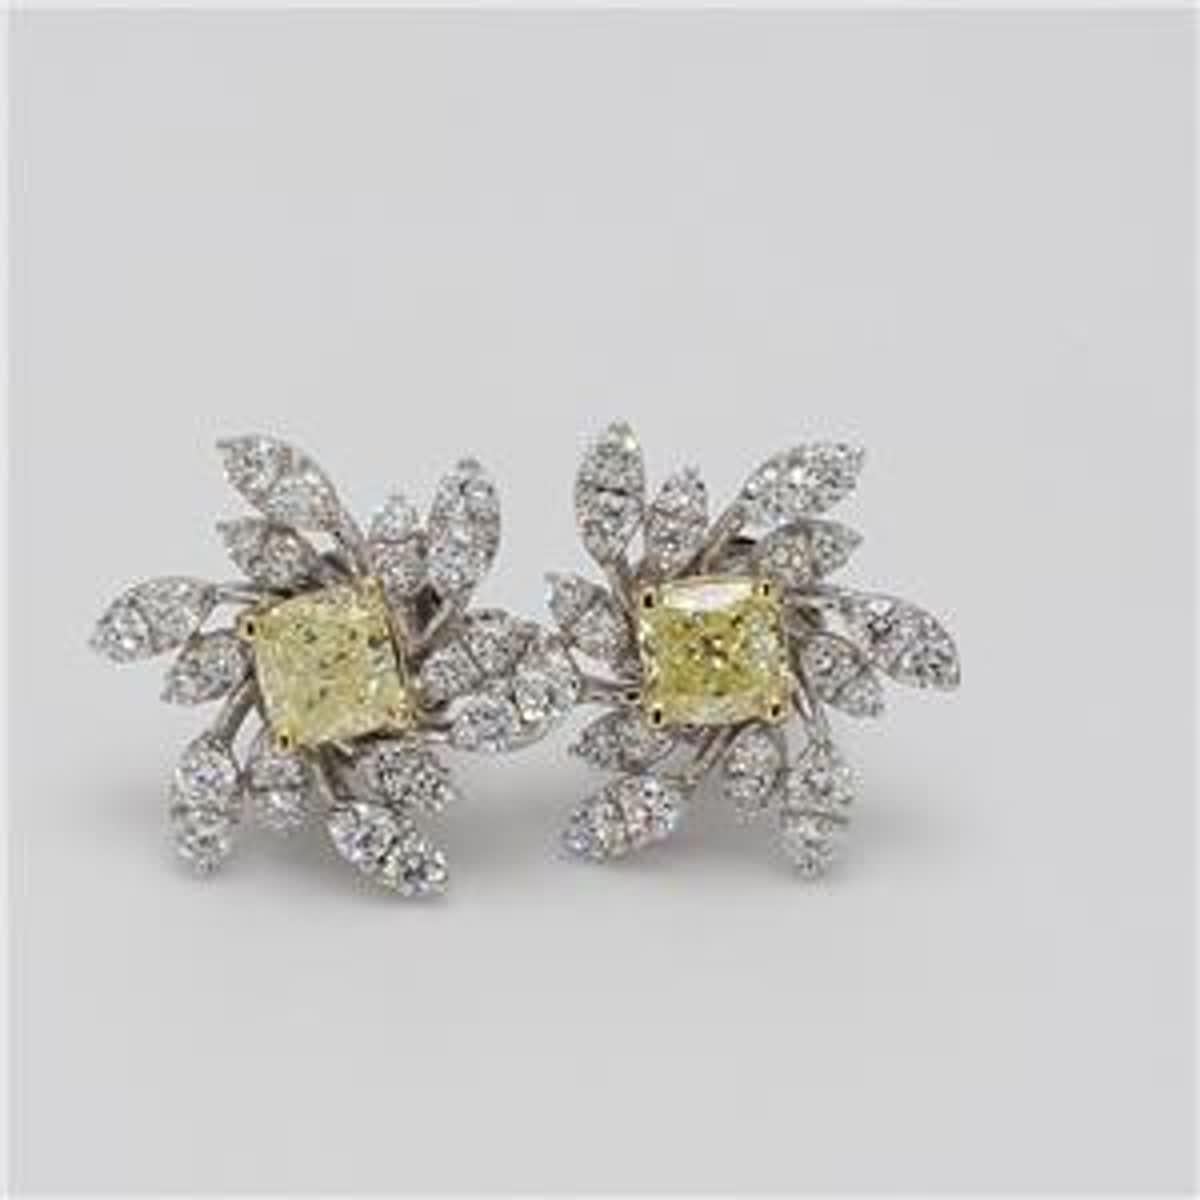 RareGemWorld's classic natural cushion cut yellow diamond earrings. Mounted in a beautiful 18K Yellow and White Gold setting with natural cushion cut yellow diamonds. The yellow diamonds are surrounded by small round natural white diamond melee in a